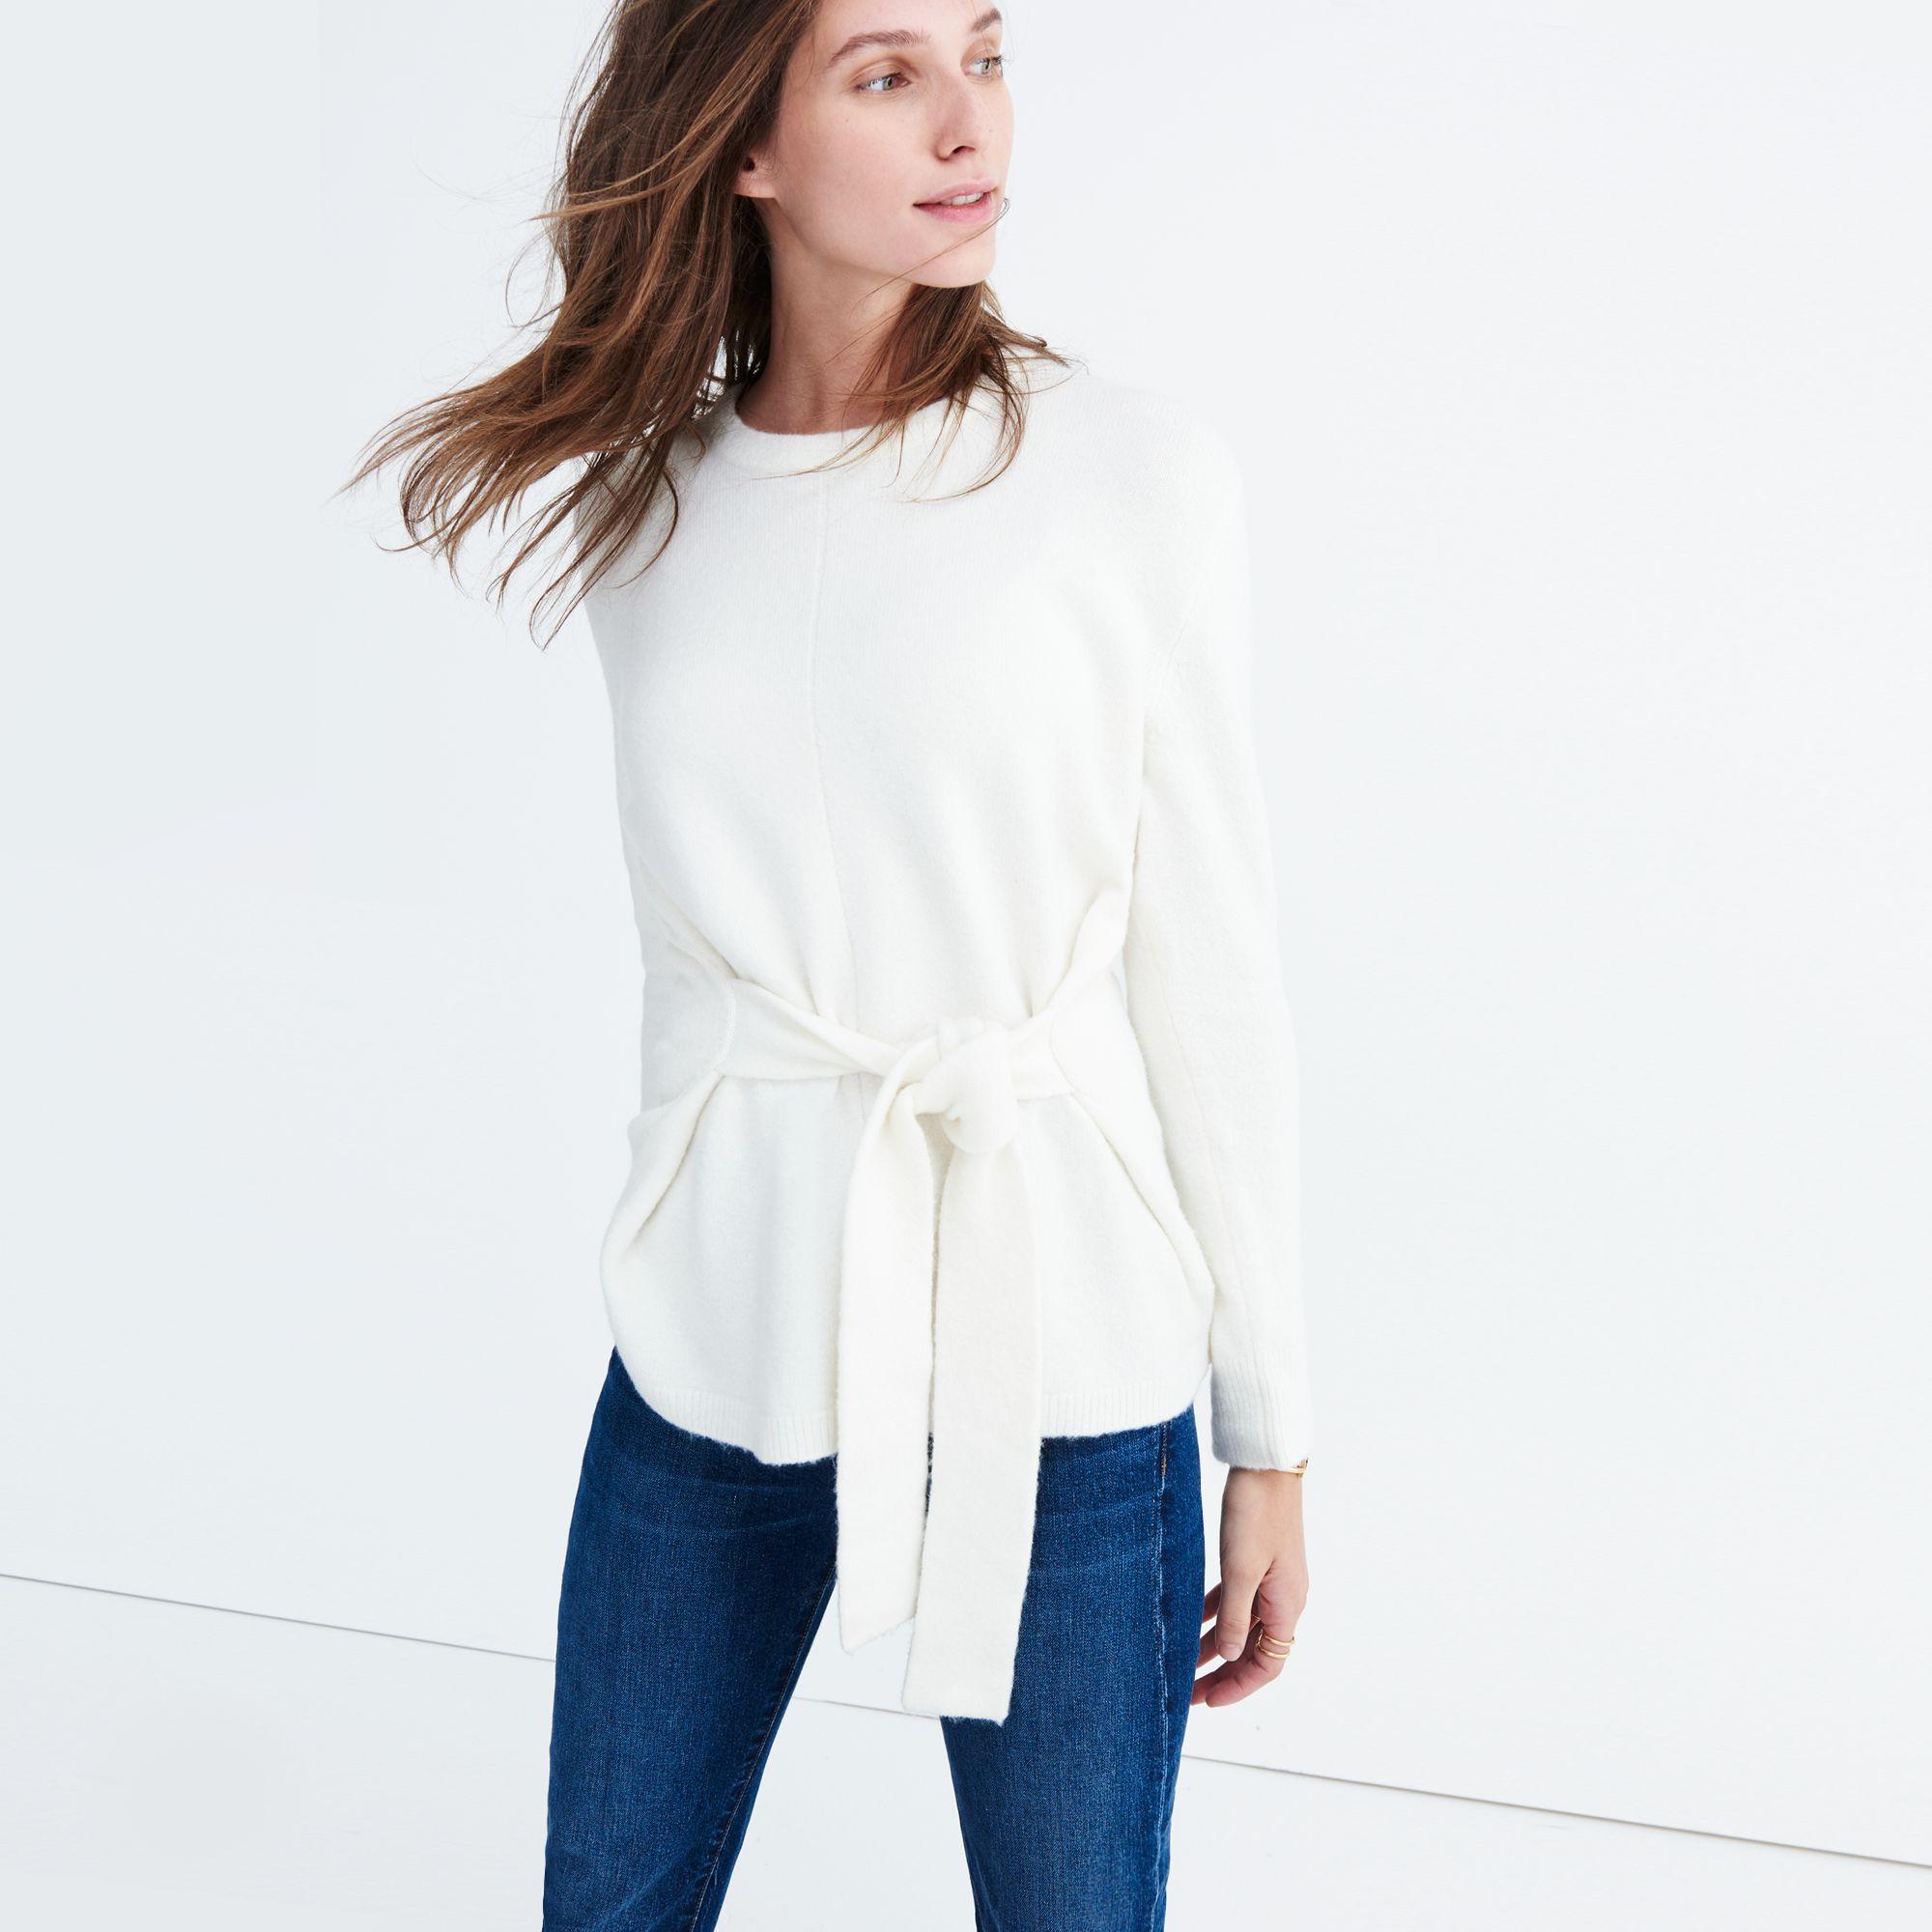 White wrap sweater outfits for women that make